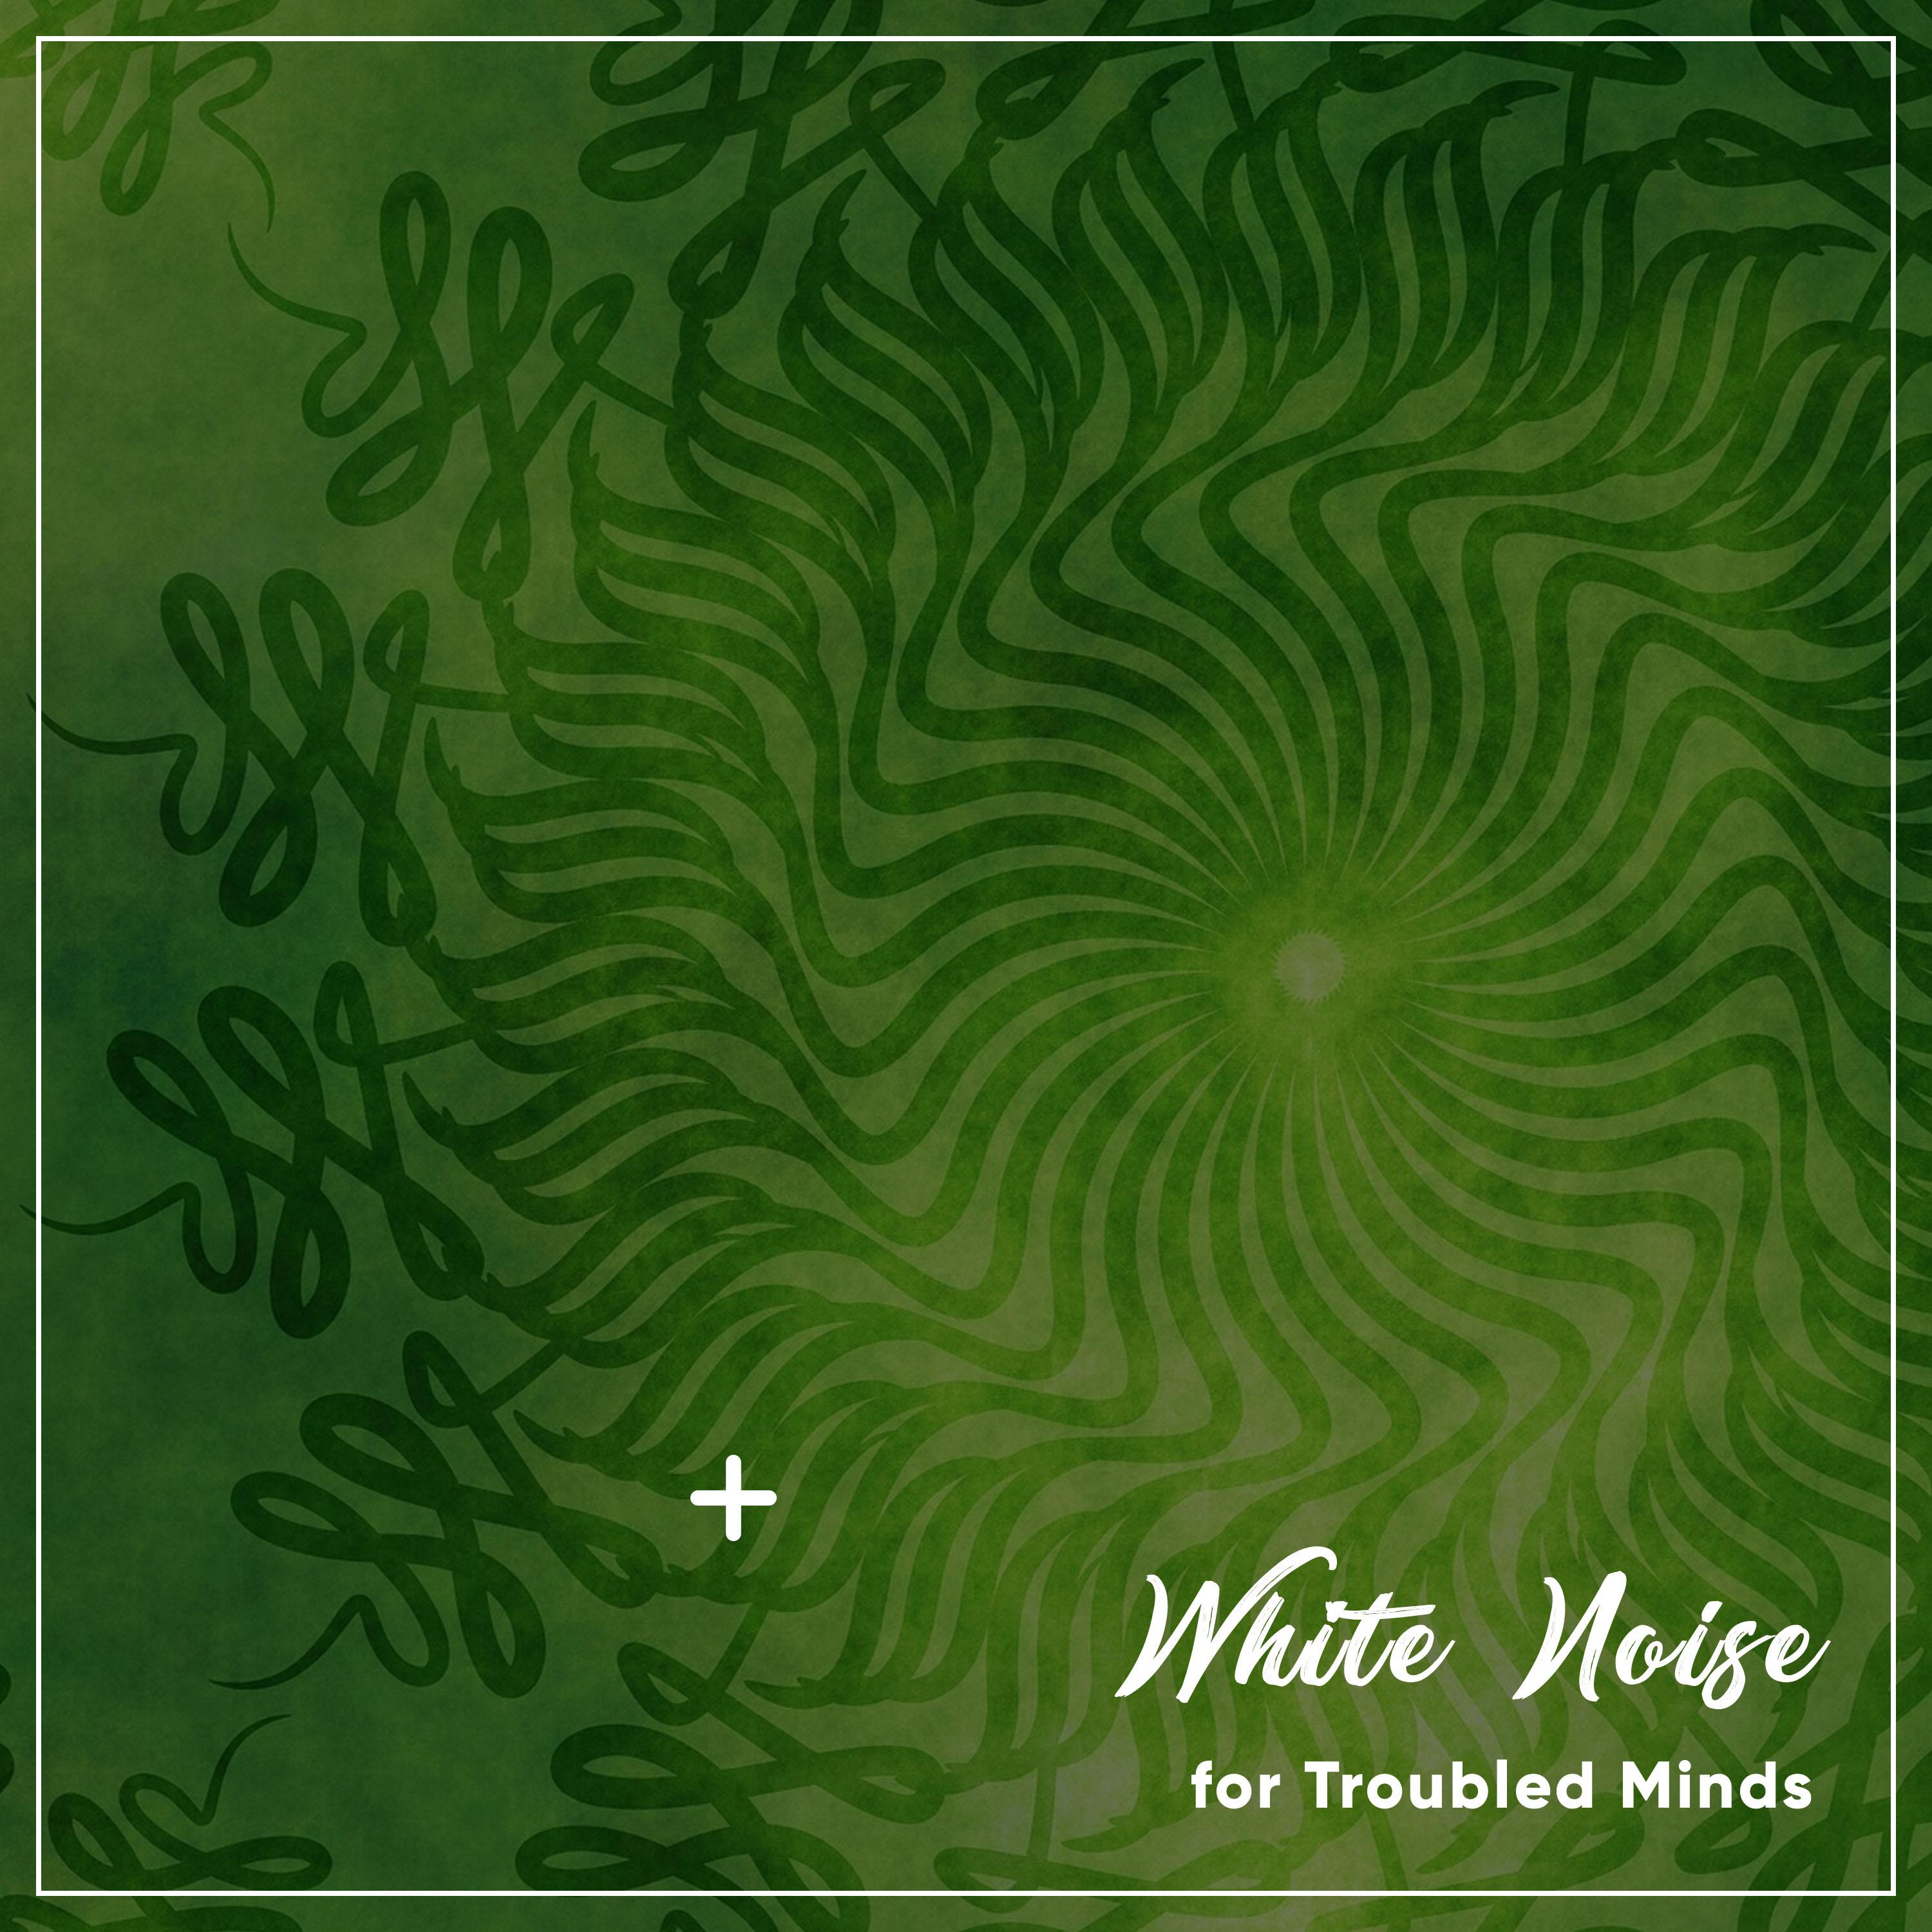 18 White Noise Binaural Sounds for Troubled Minds